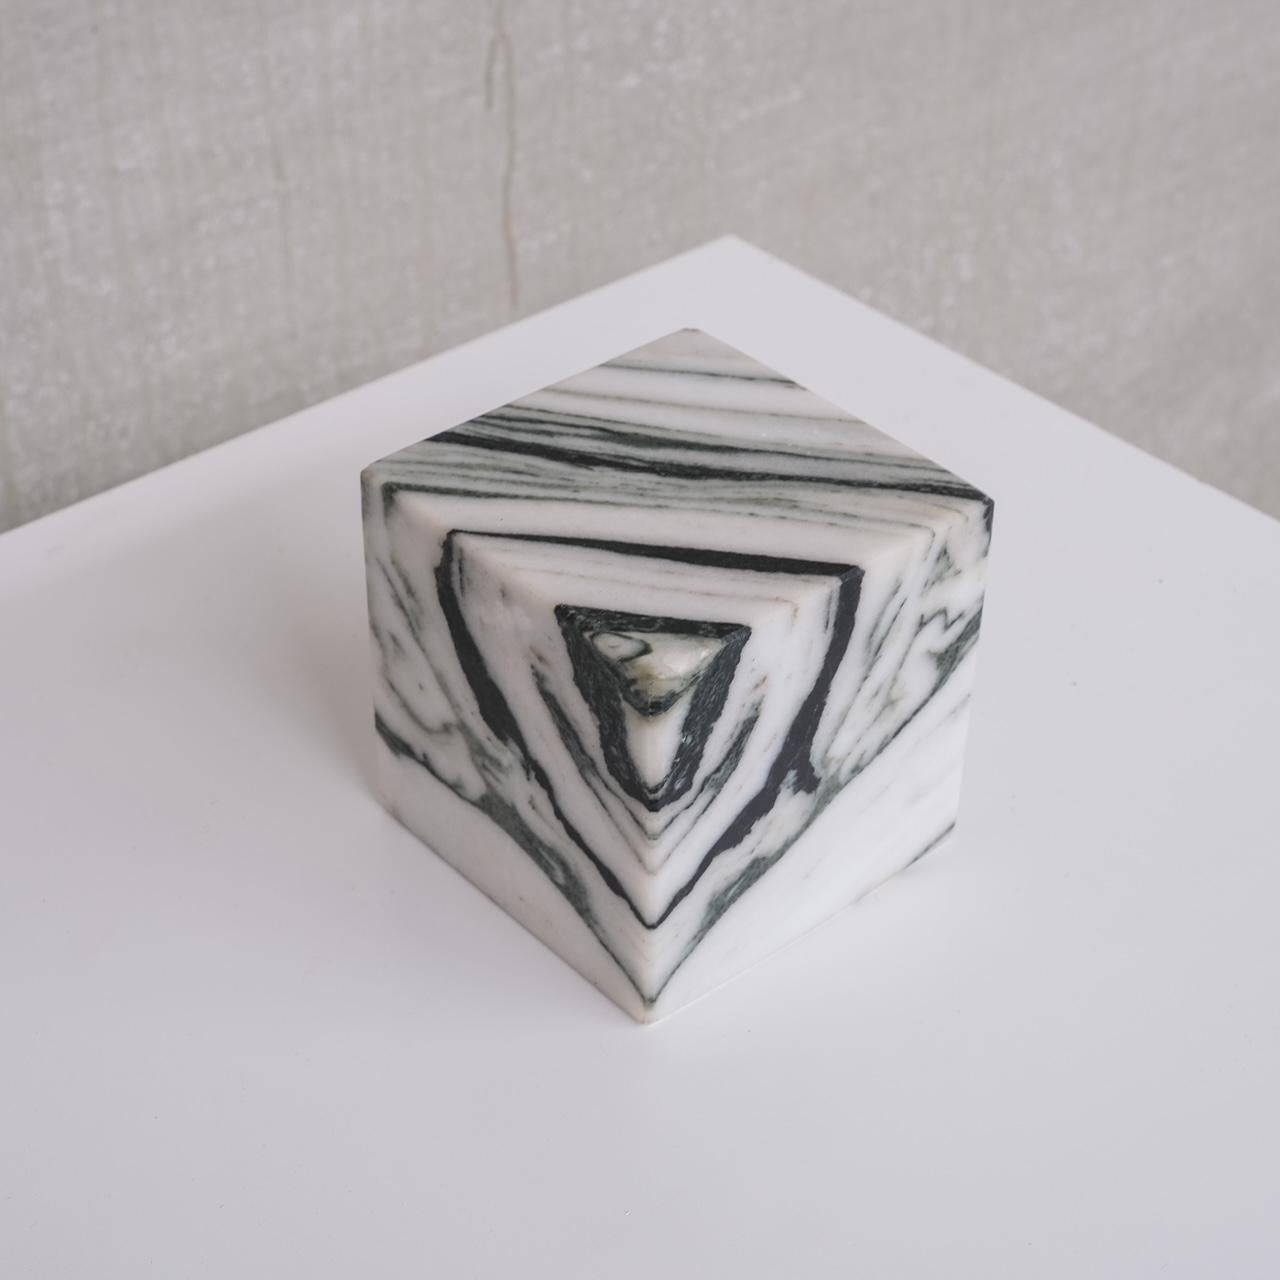 A small solid marble square.

Italy, circa 1970s.

Ideal desk or shelf geometric curio.

Tactile objet.

Vintage condition, occasional scuff commensurate with age.

Location: Belgium Gallery.

Dimensions: 10 W x 10 D x 10 H in